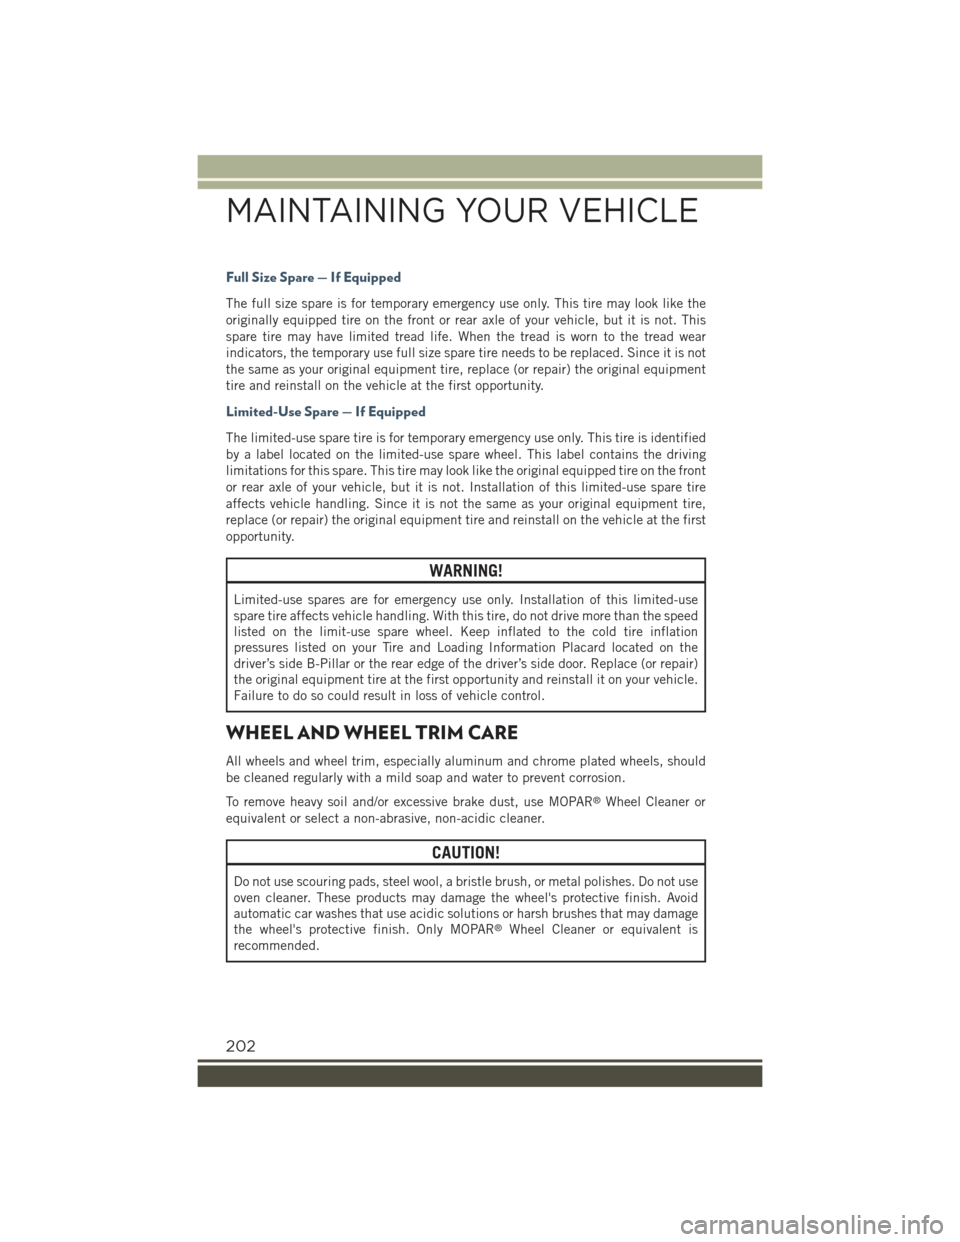 JEEP RENEGADE 2015 1.G User Guide Full Size Spare — If Equipped
The full size spare is for temporary emergency use only. This tire may look like the
originally equipped tire on the front or rear axle of your vehicle, but it is not. 